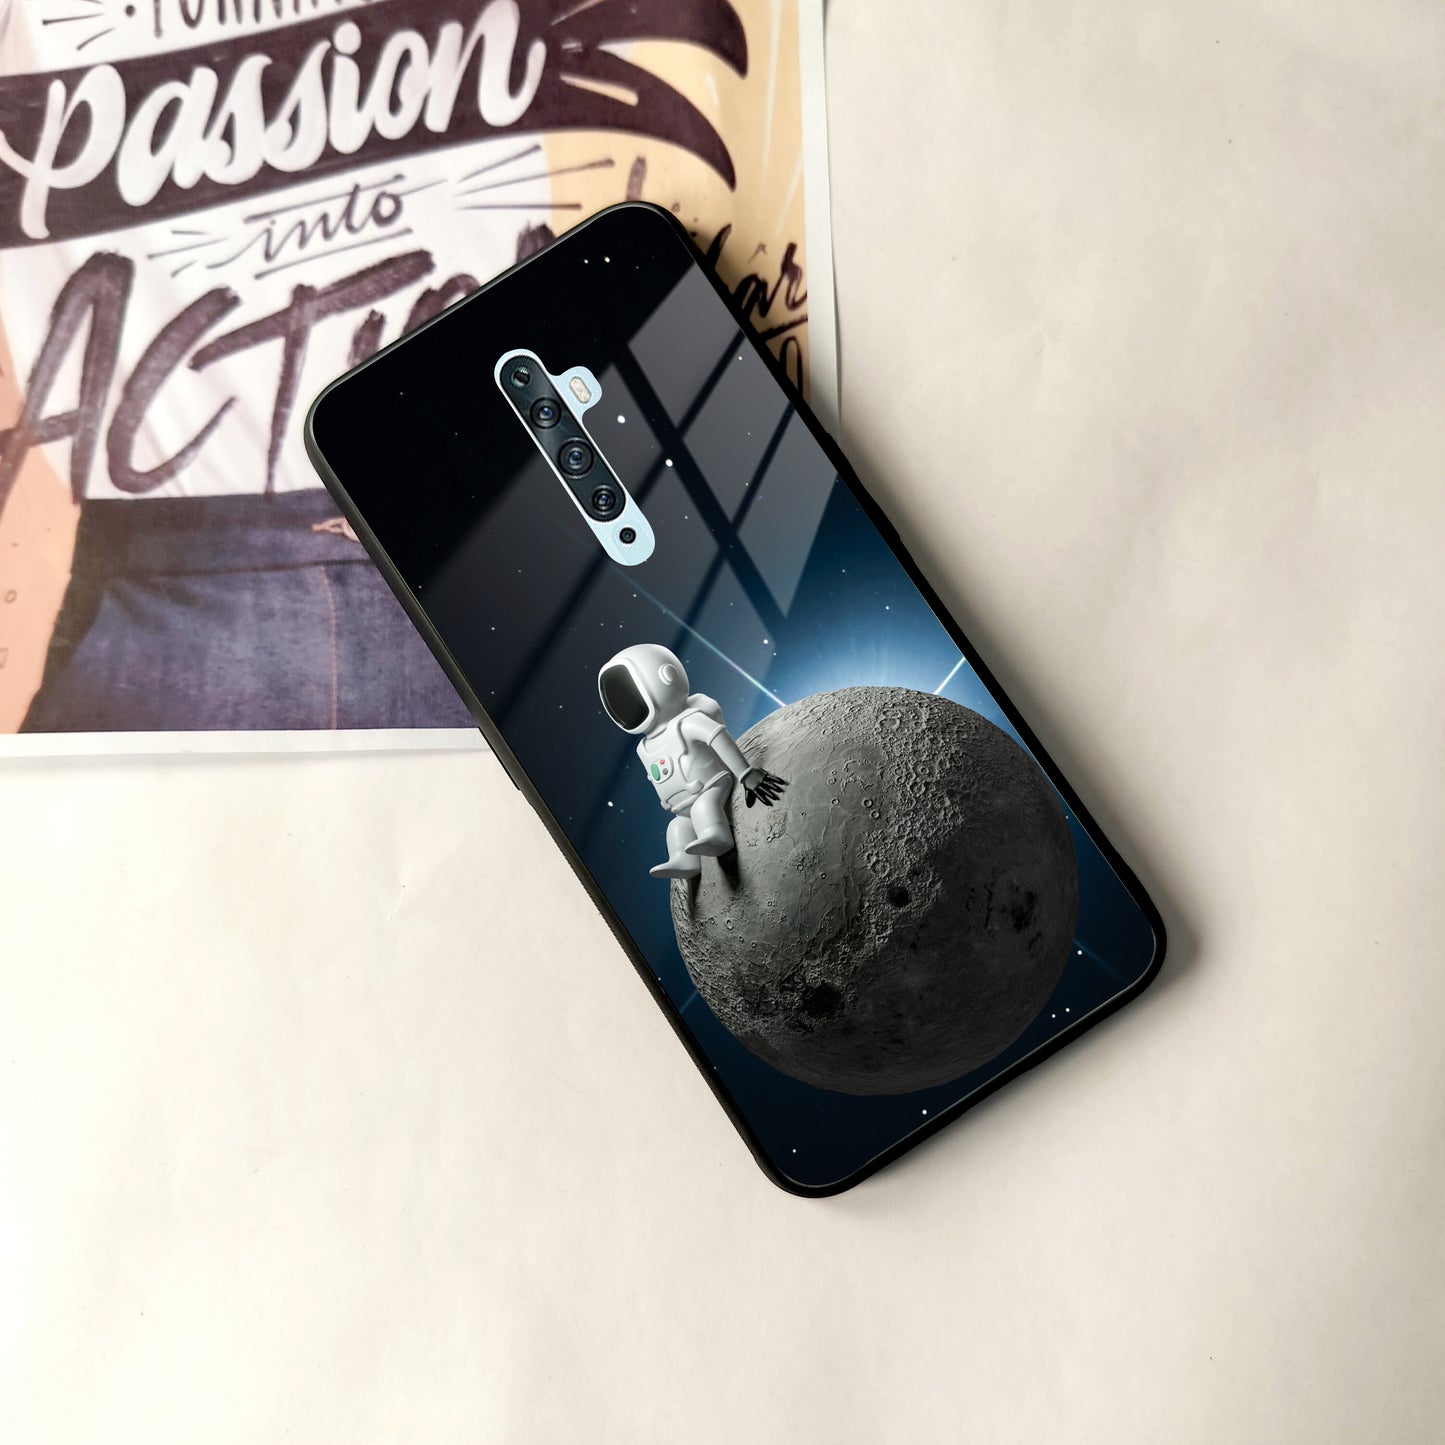 Astronod Moon Glass Case Cover For Oppo